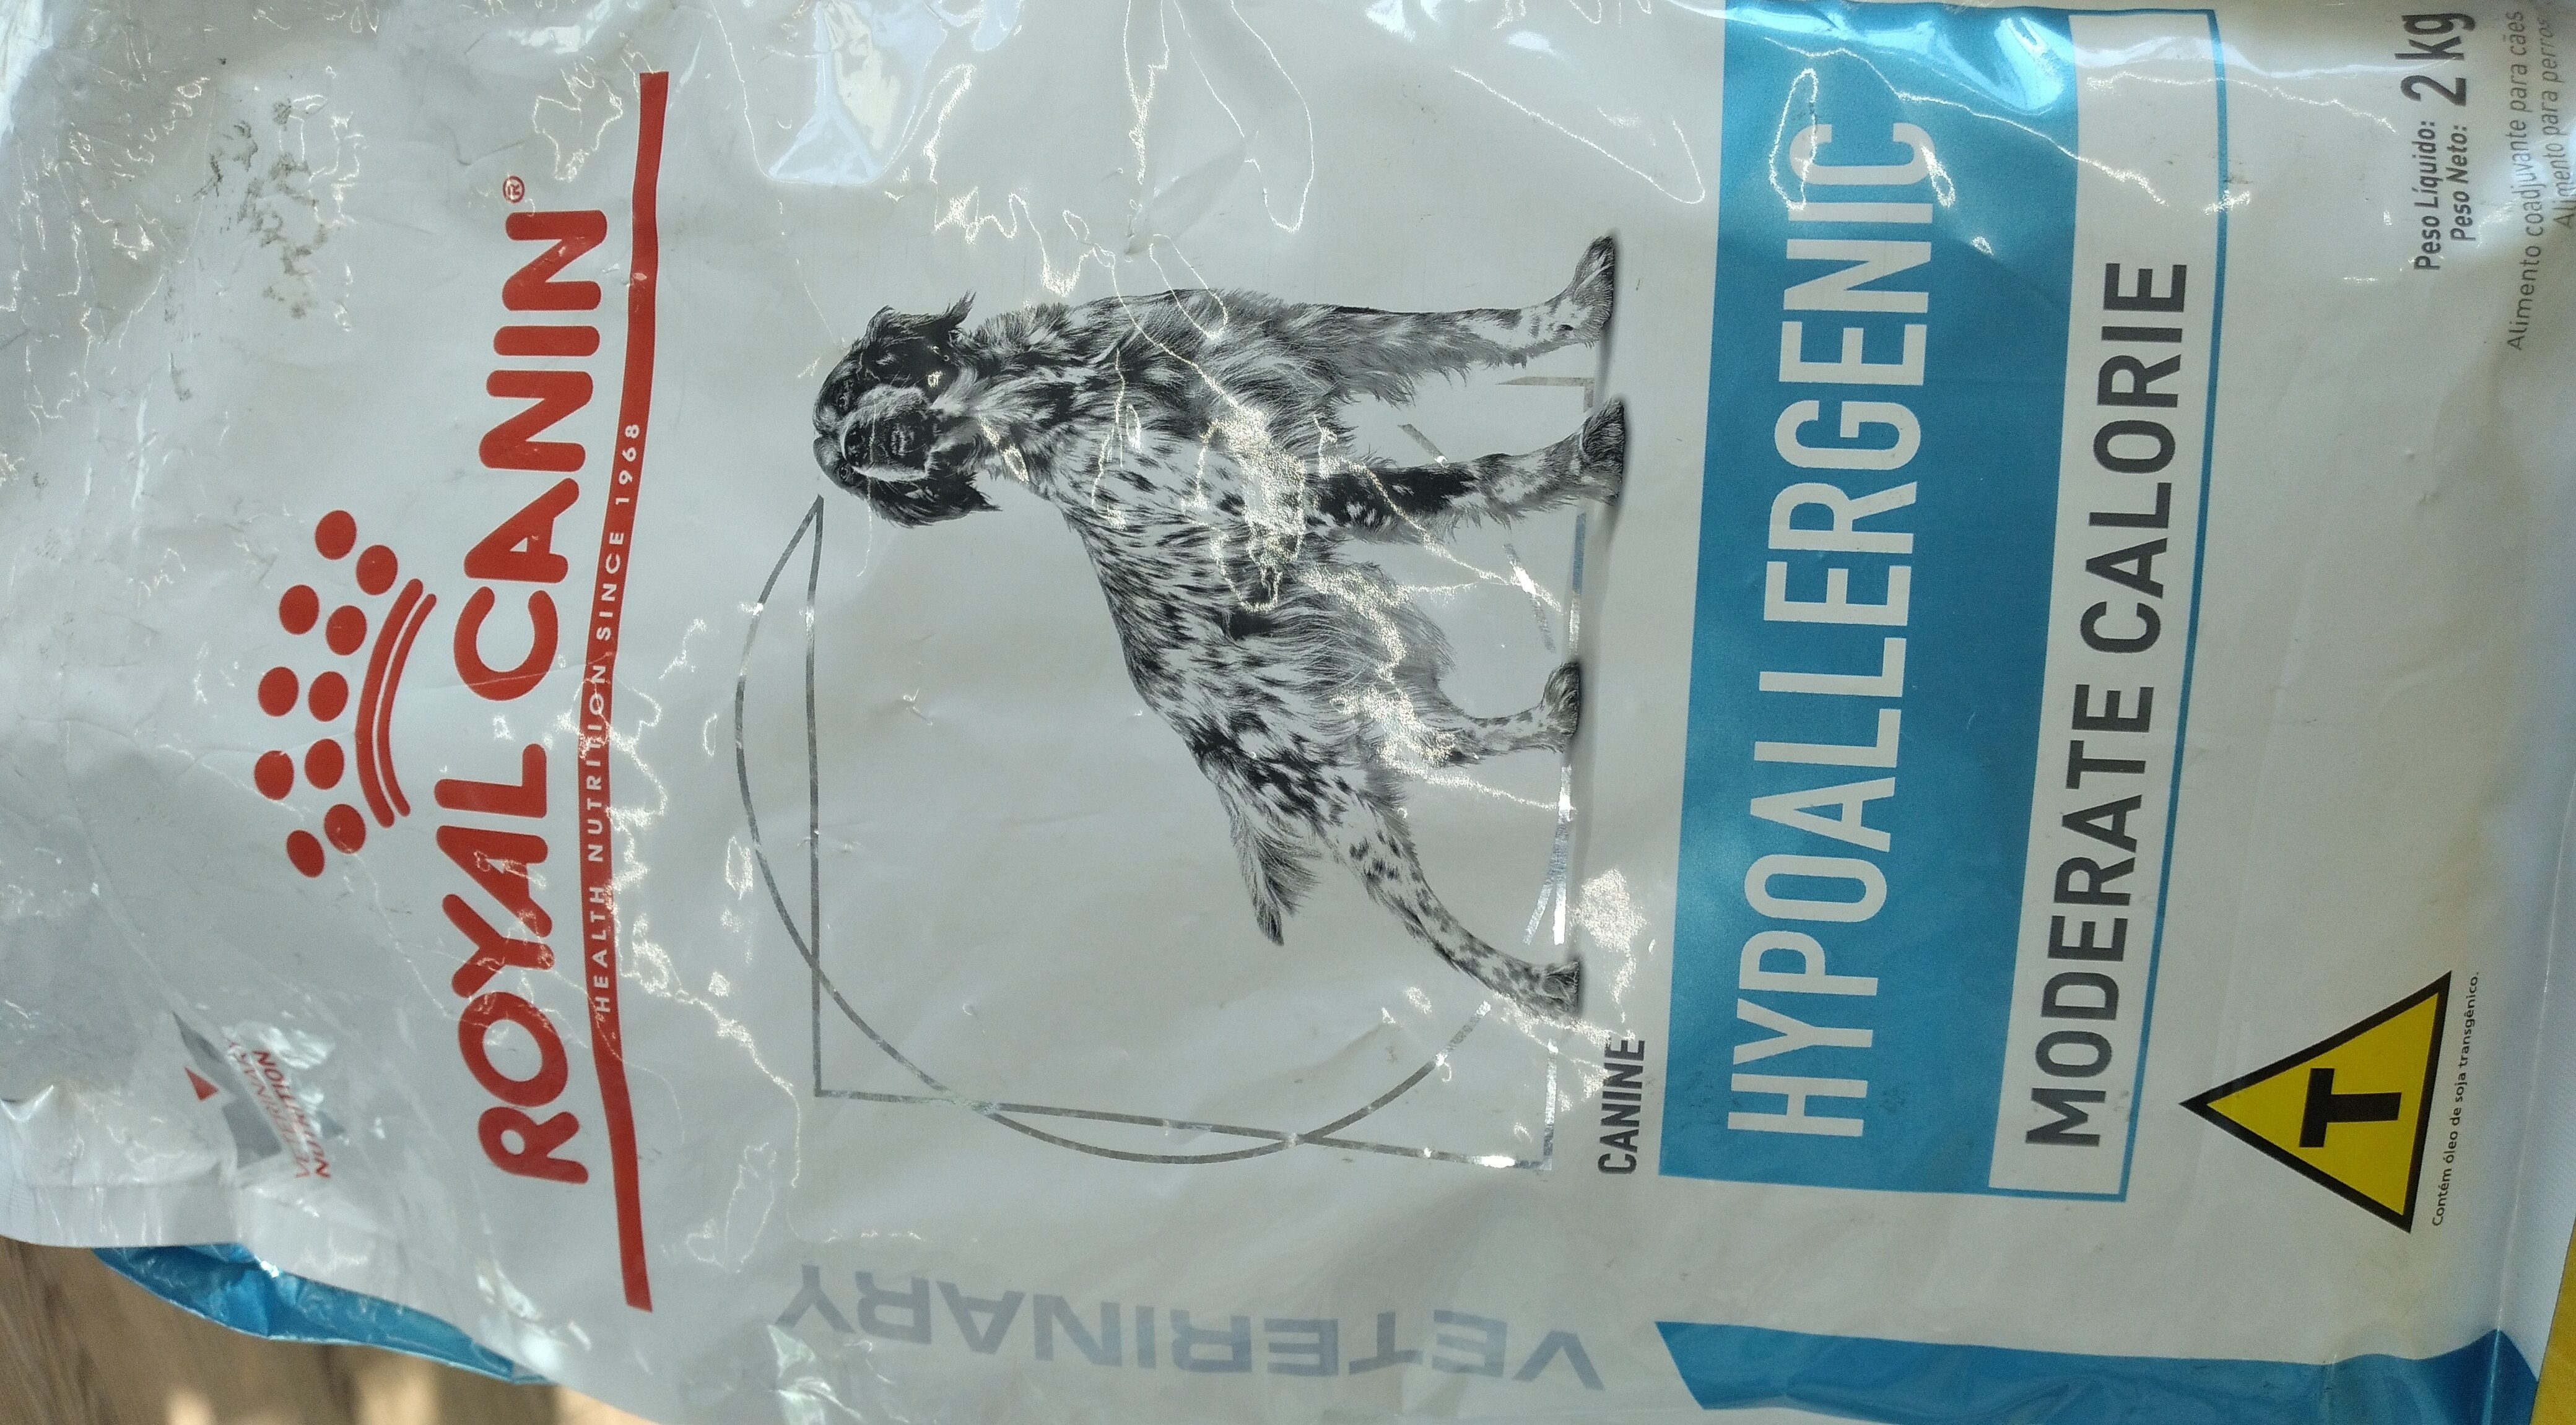 Royal canin Hypoallergenic moderate calorie 2kg - Product - pt